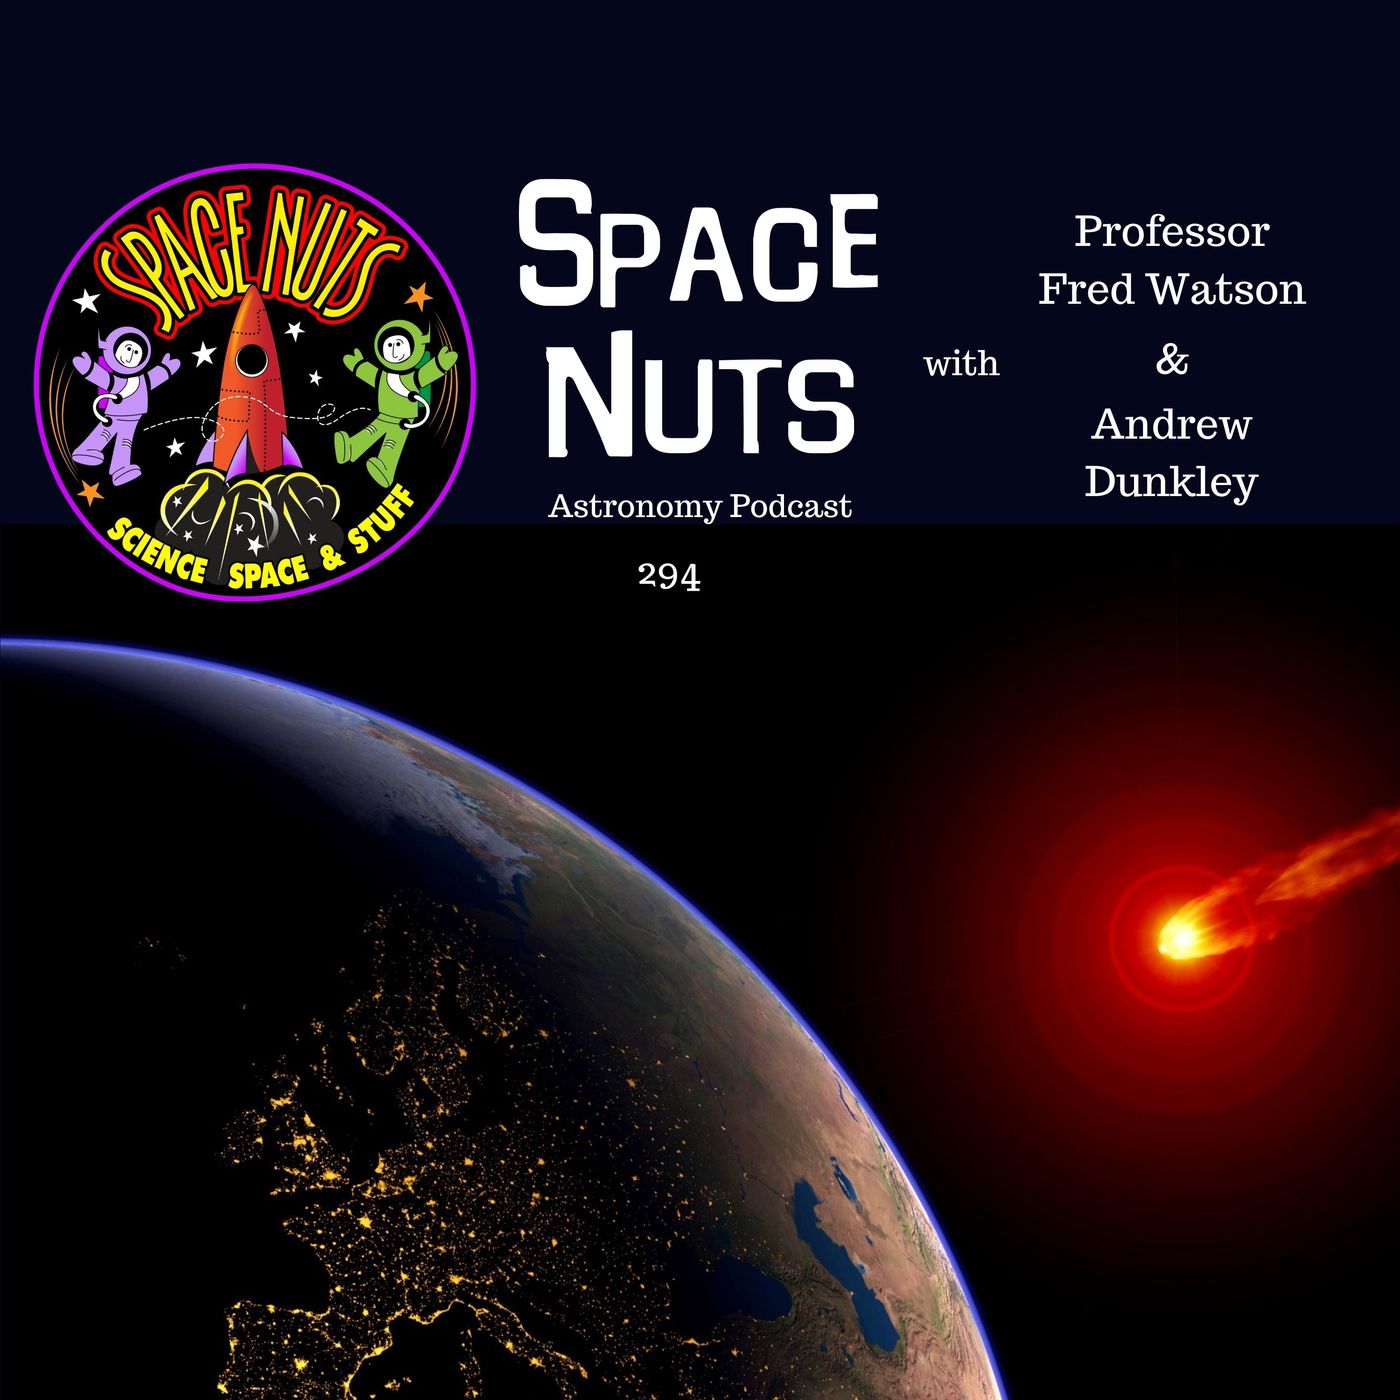 Space nuts full movie